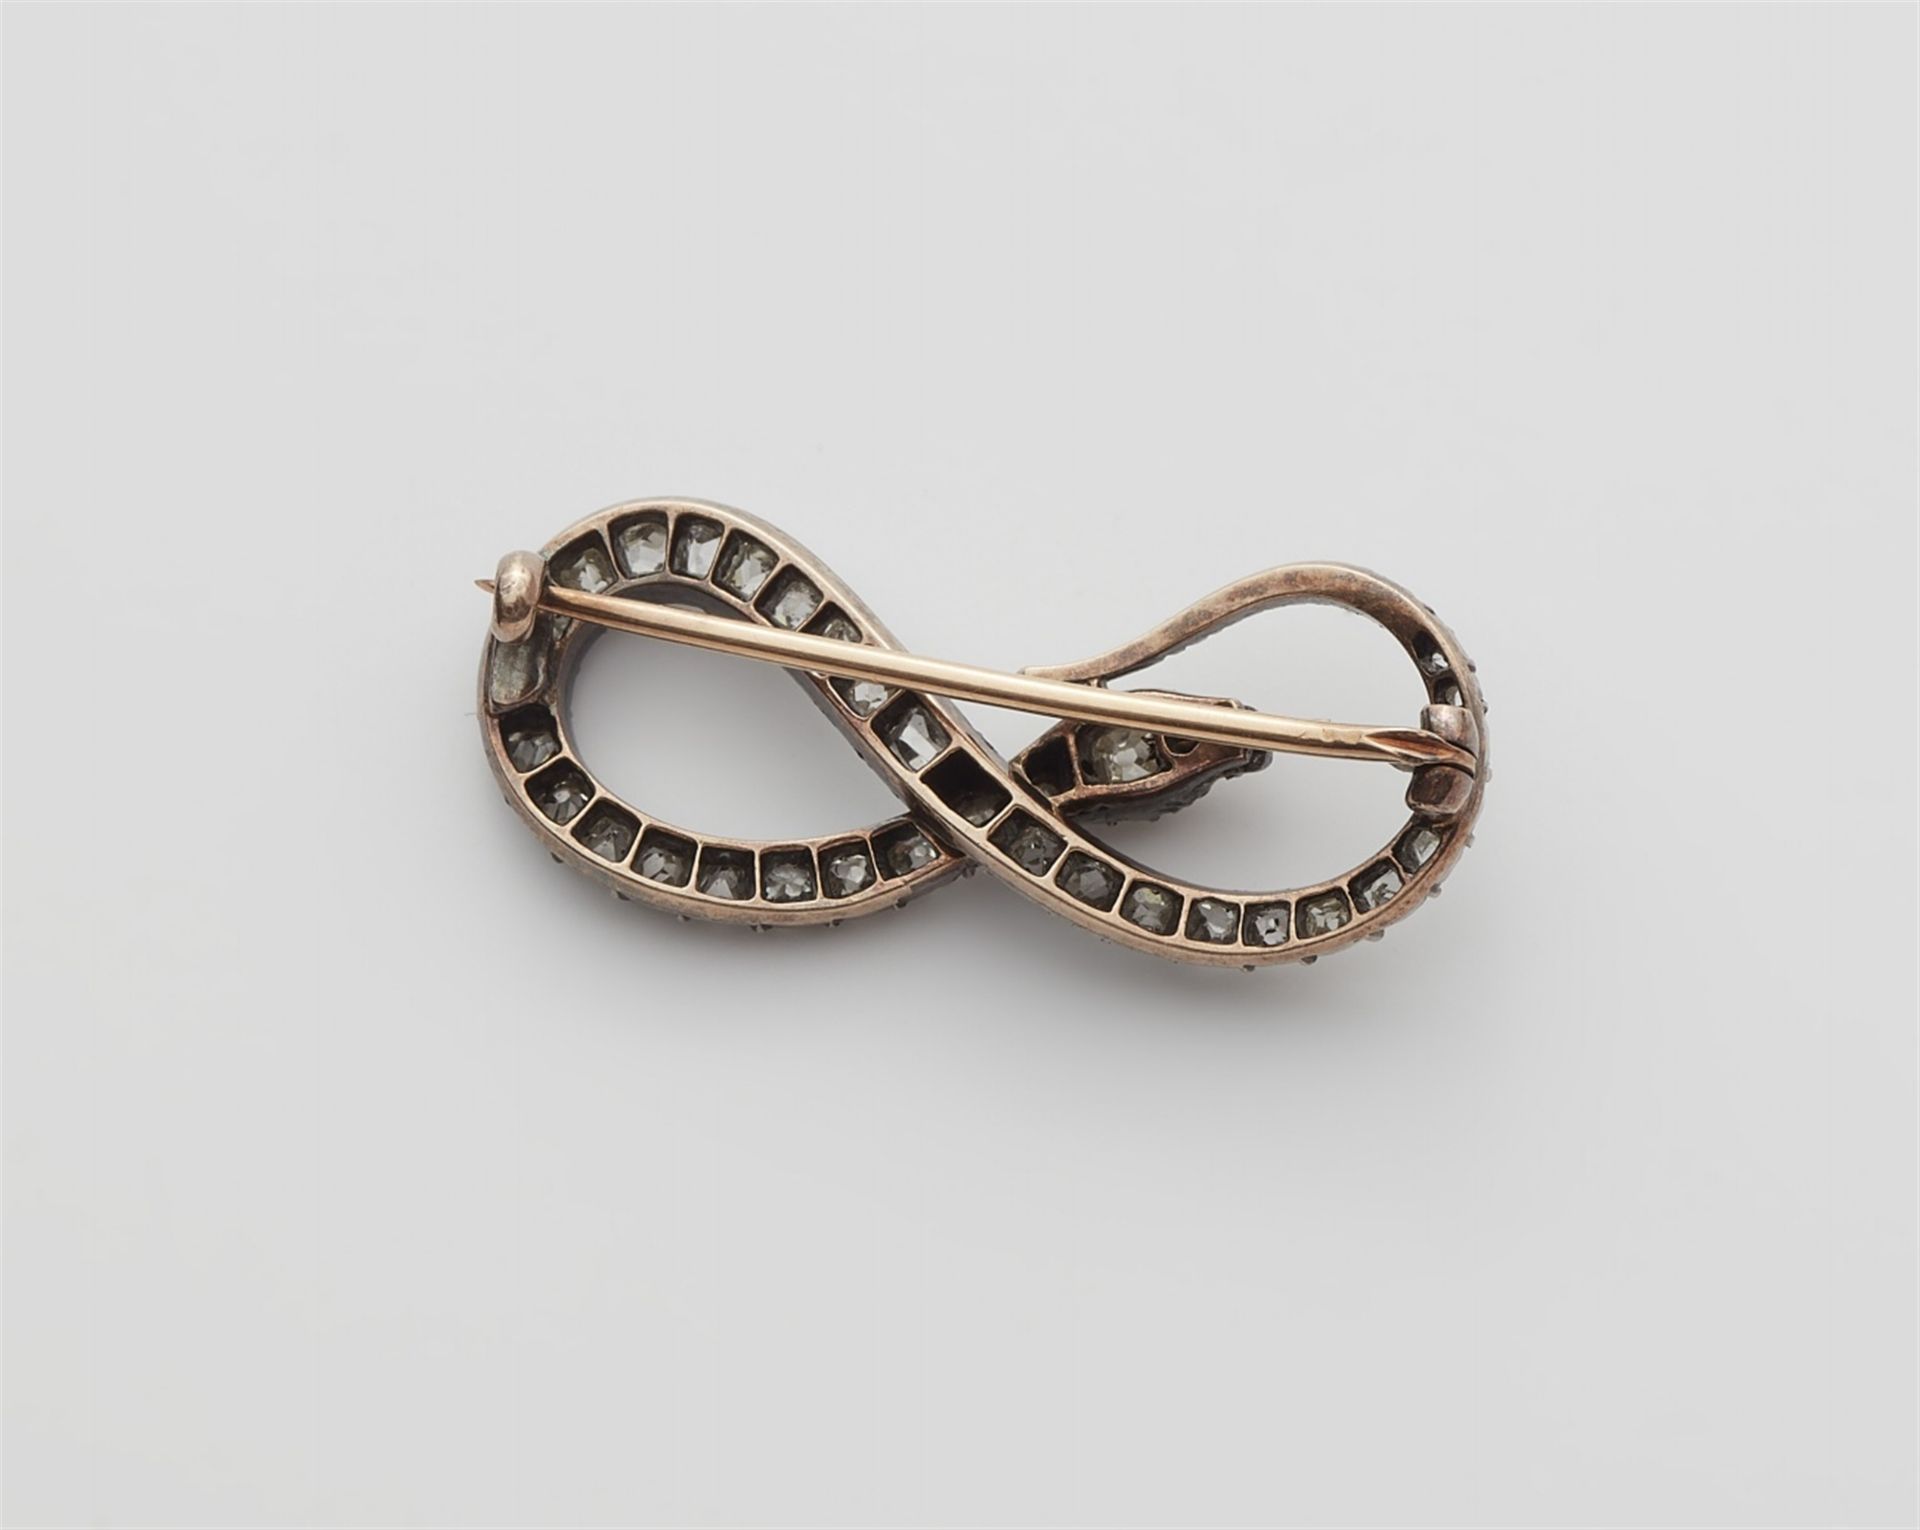 A silver and 14k gold diamond snake brooch - Image 2 of 2